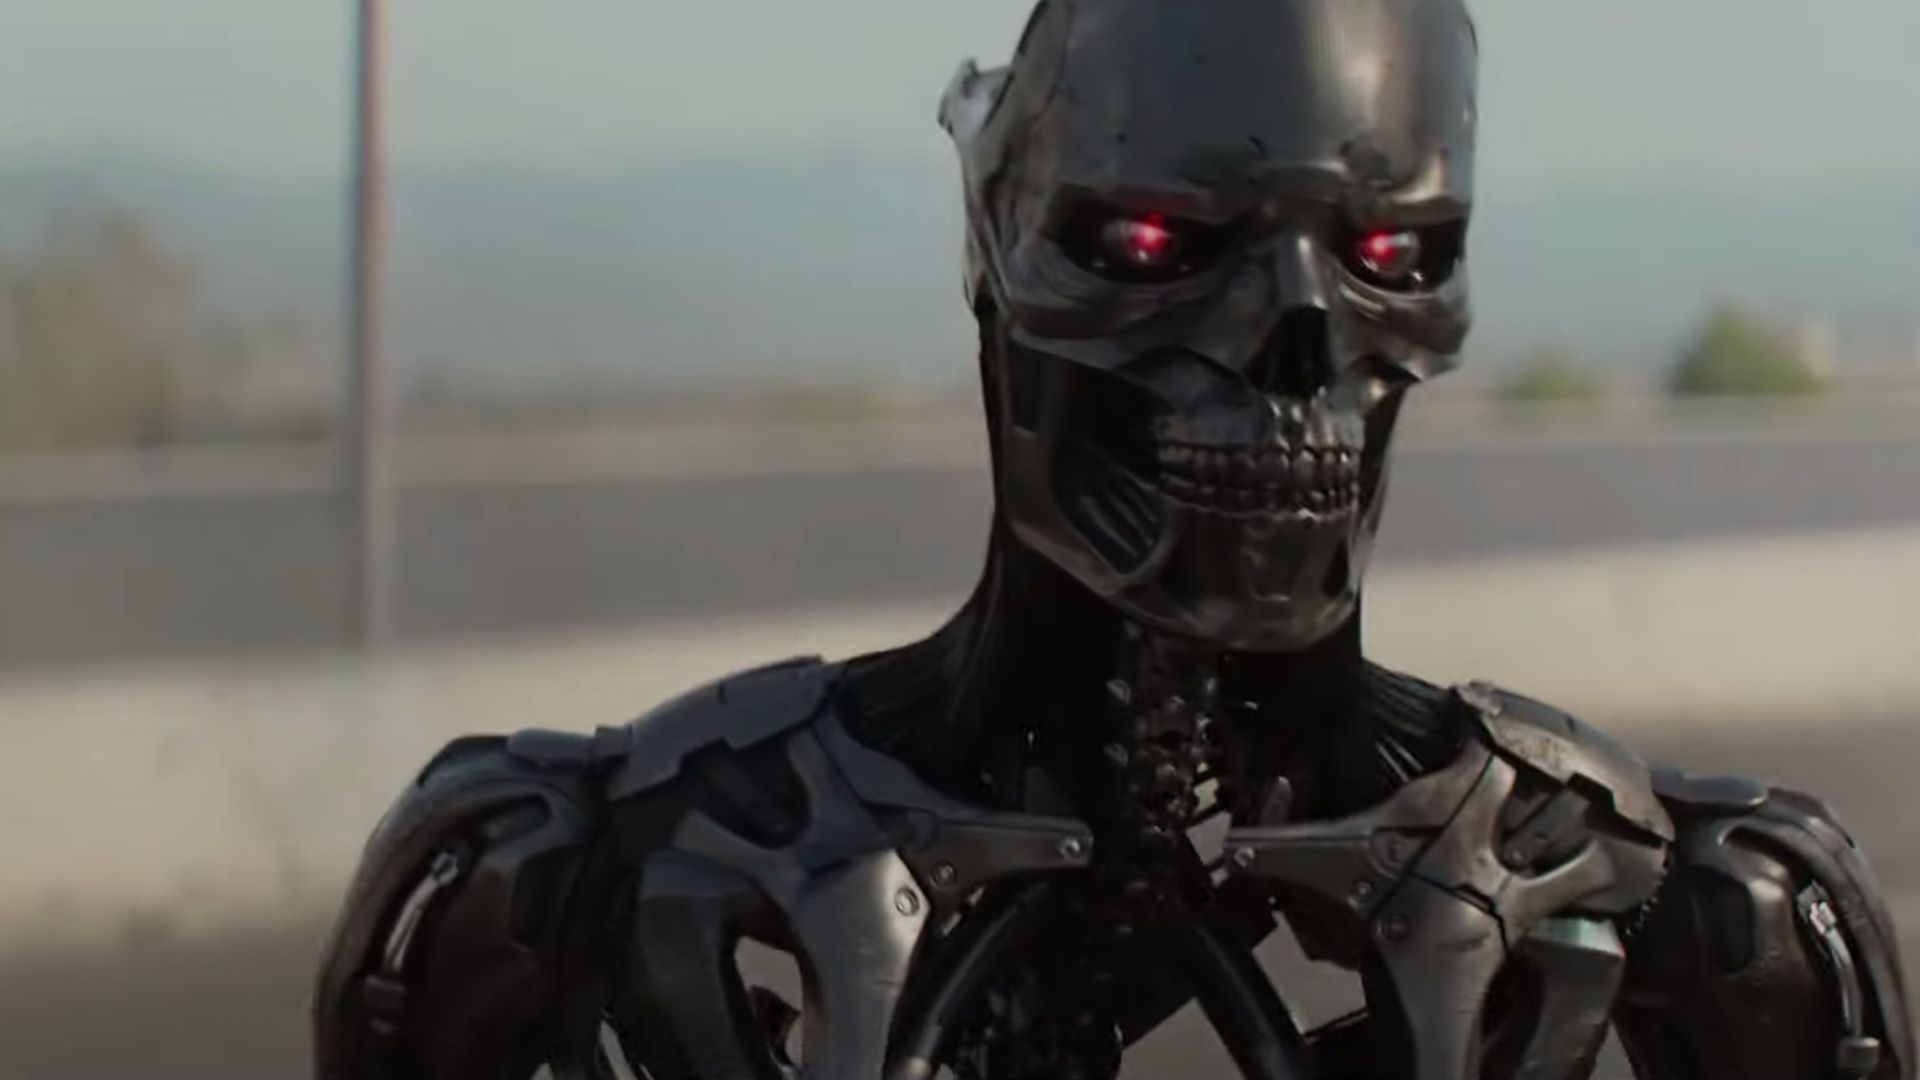 The First for TERMINATOR: DARK FATE Has Blasted Its Way